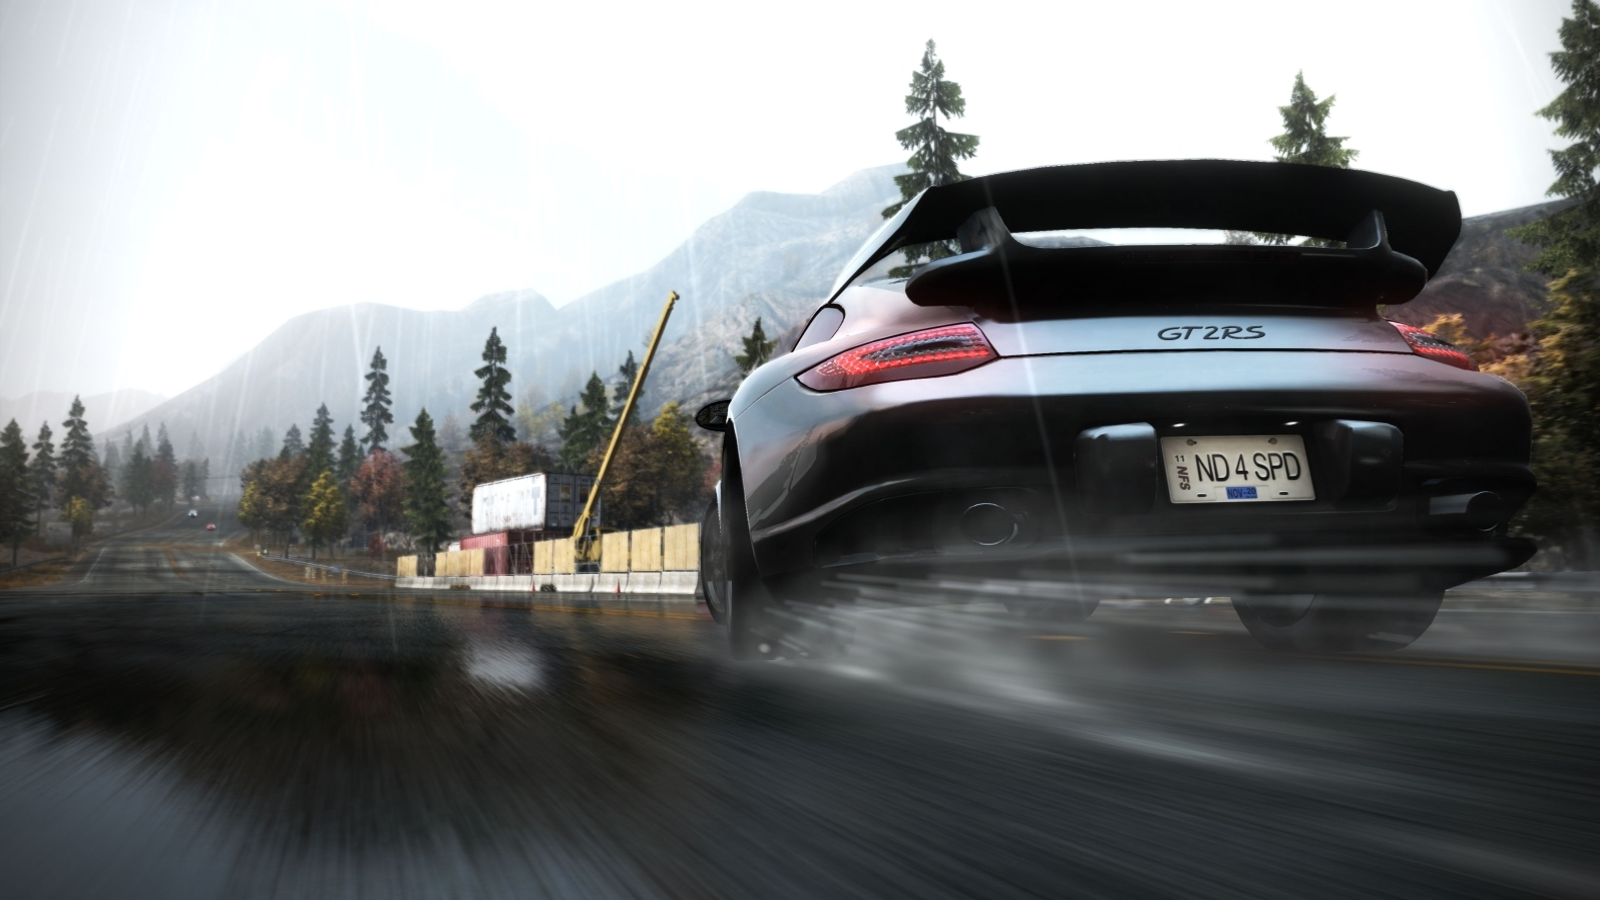 Need For Speed Carbon, Shift, And More Getting Delisted From Digital  Storefronts - GameSpot